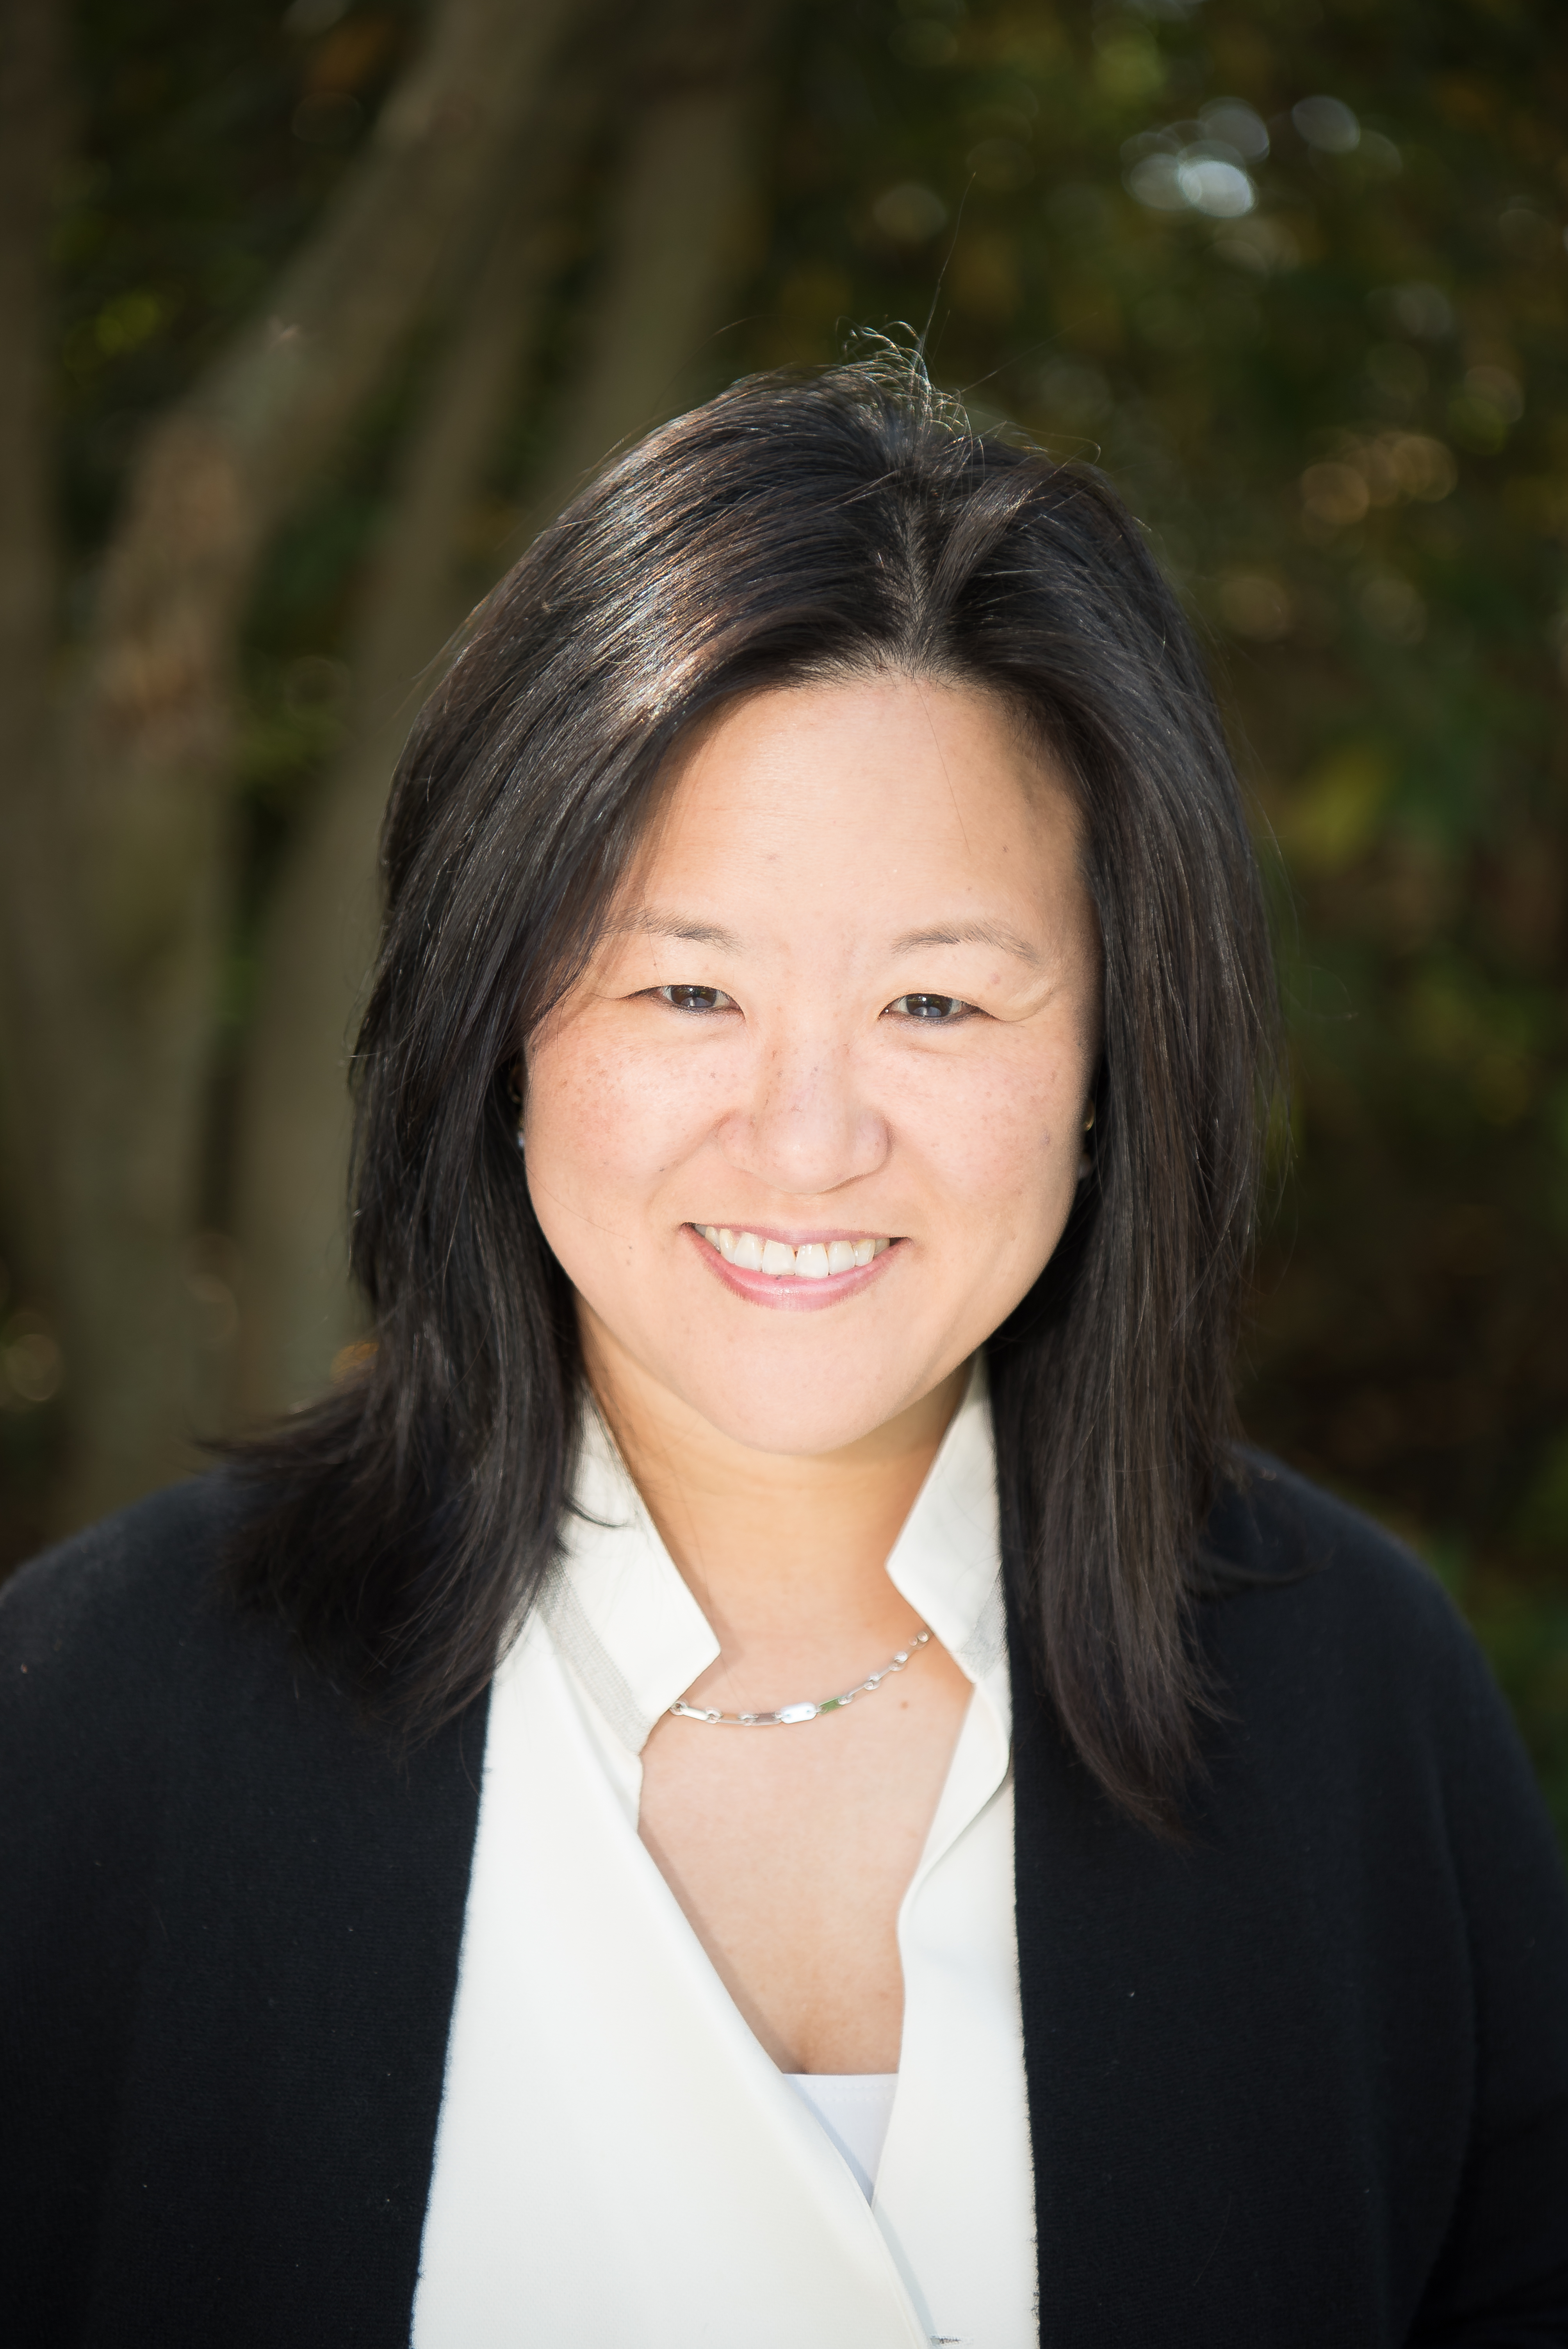 Tracy Kim Joins DIG as Chief Operating Officer